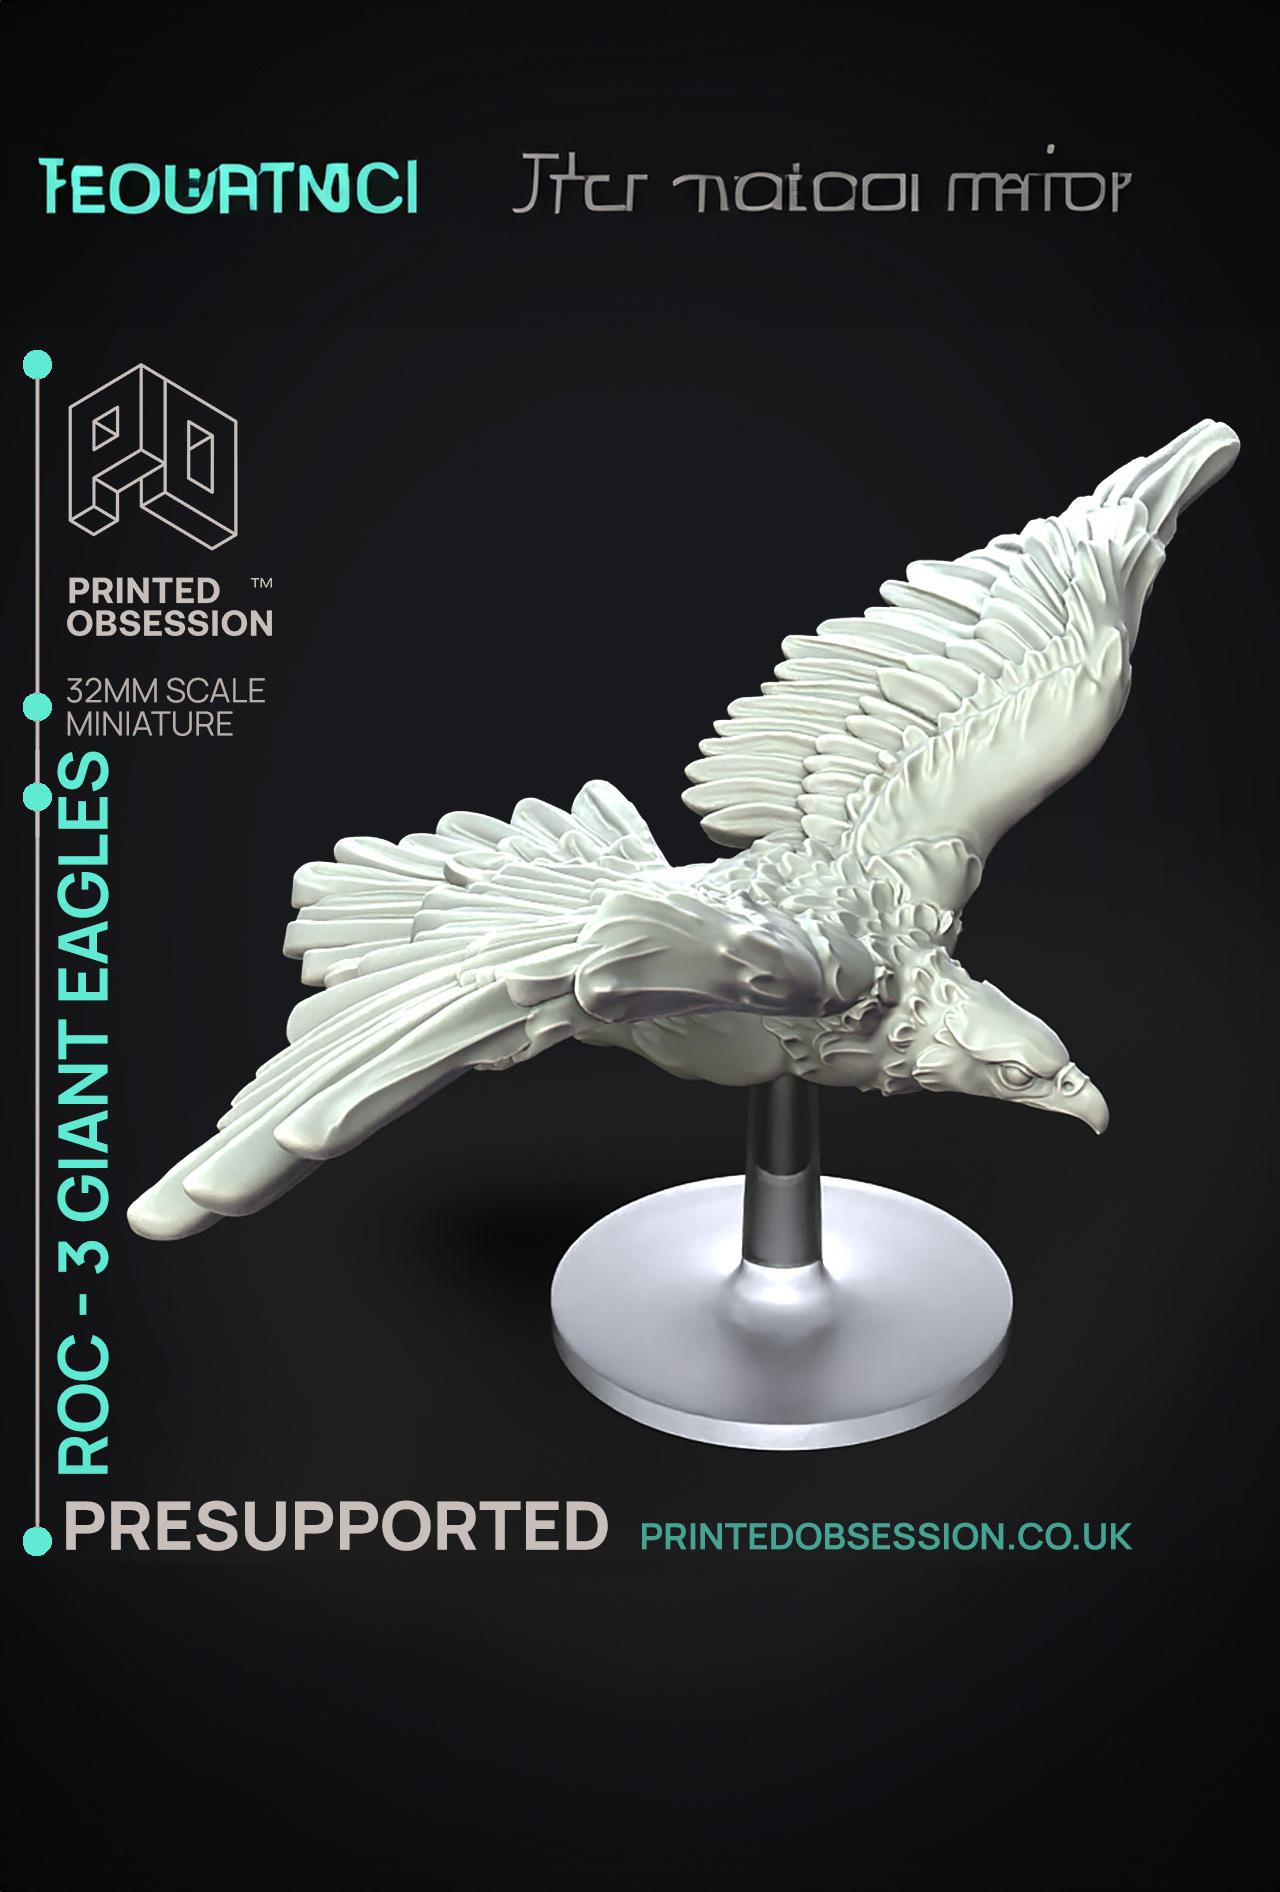 Roc - 3 Giant Eagles - PRESUPPORTED - 32mm scale  3d model